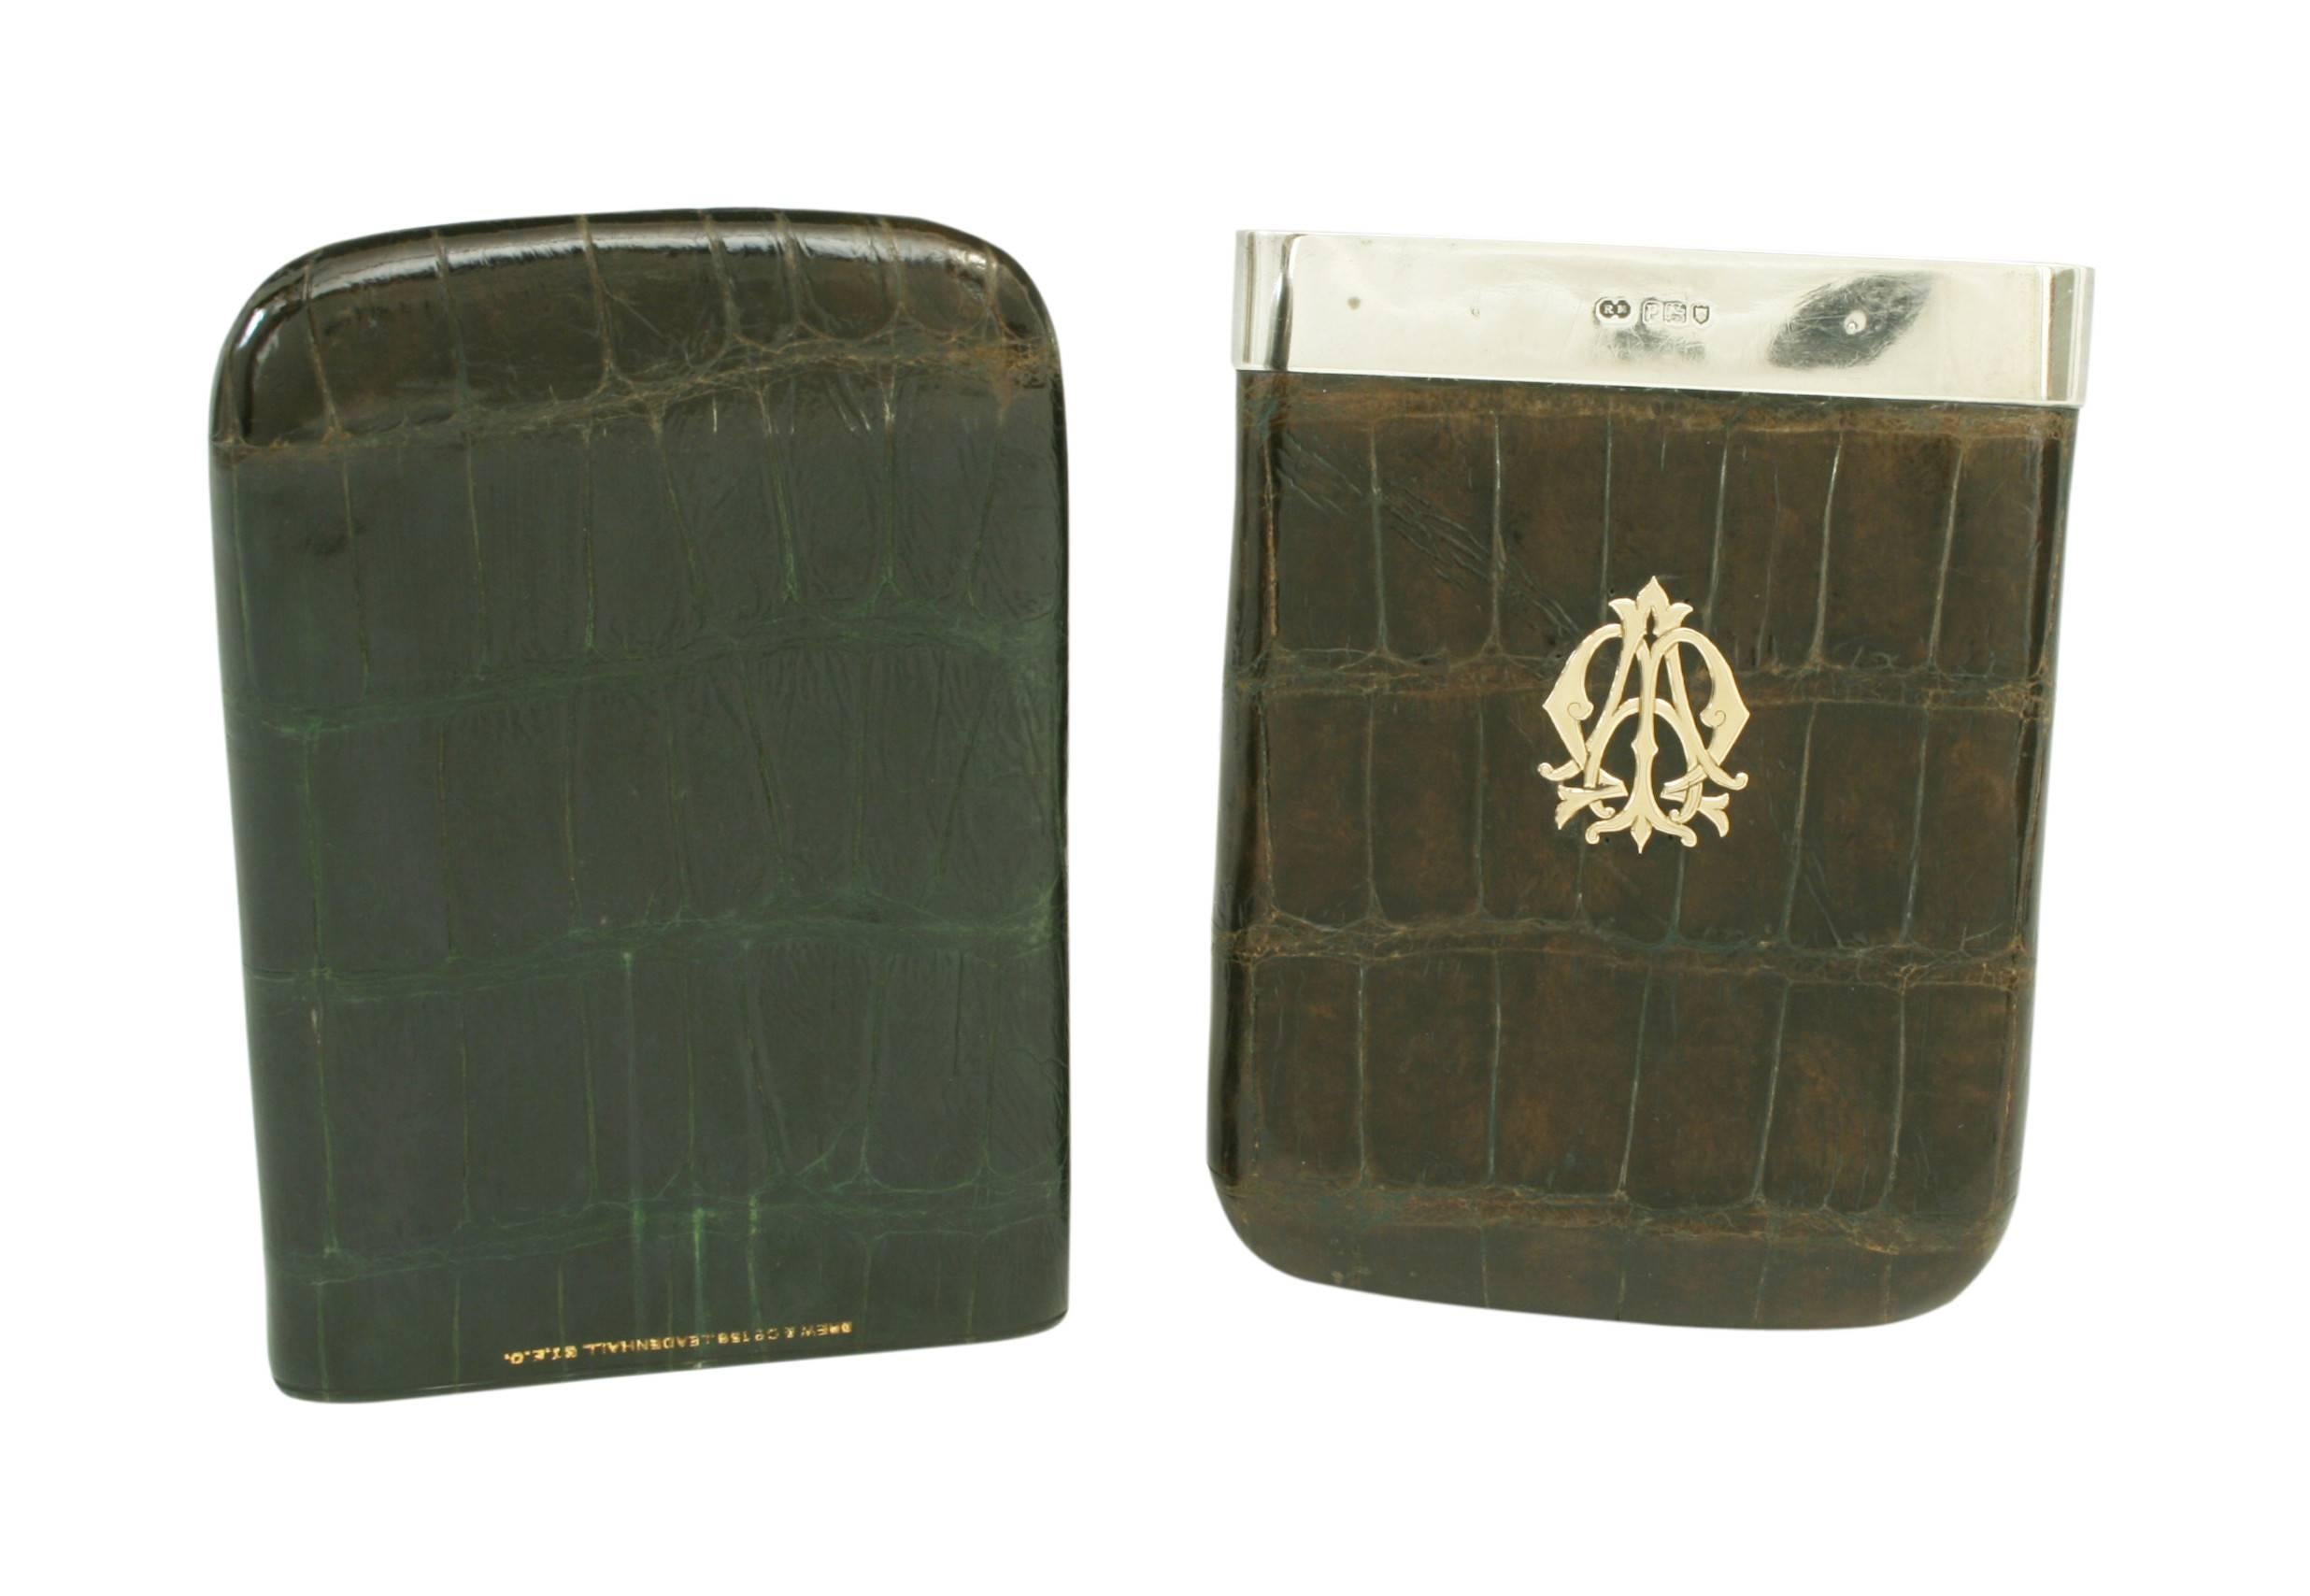 Leather cigar case with silver fittings.
Crocodile leather cigar case with silver mount. The mount is hallmarked, London 1910 with the silver smith mark 'R.M', possibly Robert Marshall from Holborn, Central London. The leather with gilt stamp 'Drew